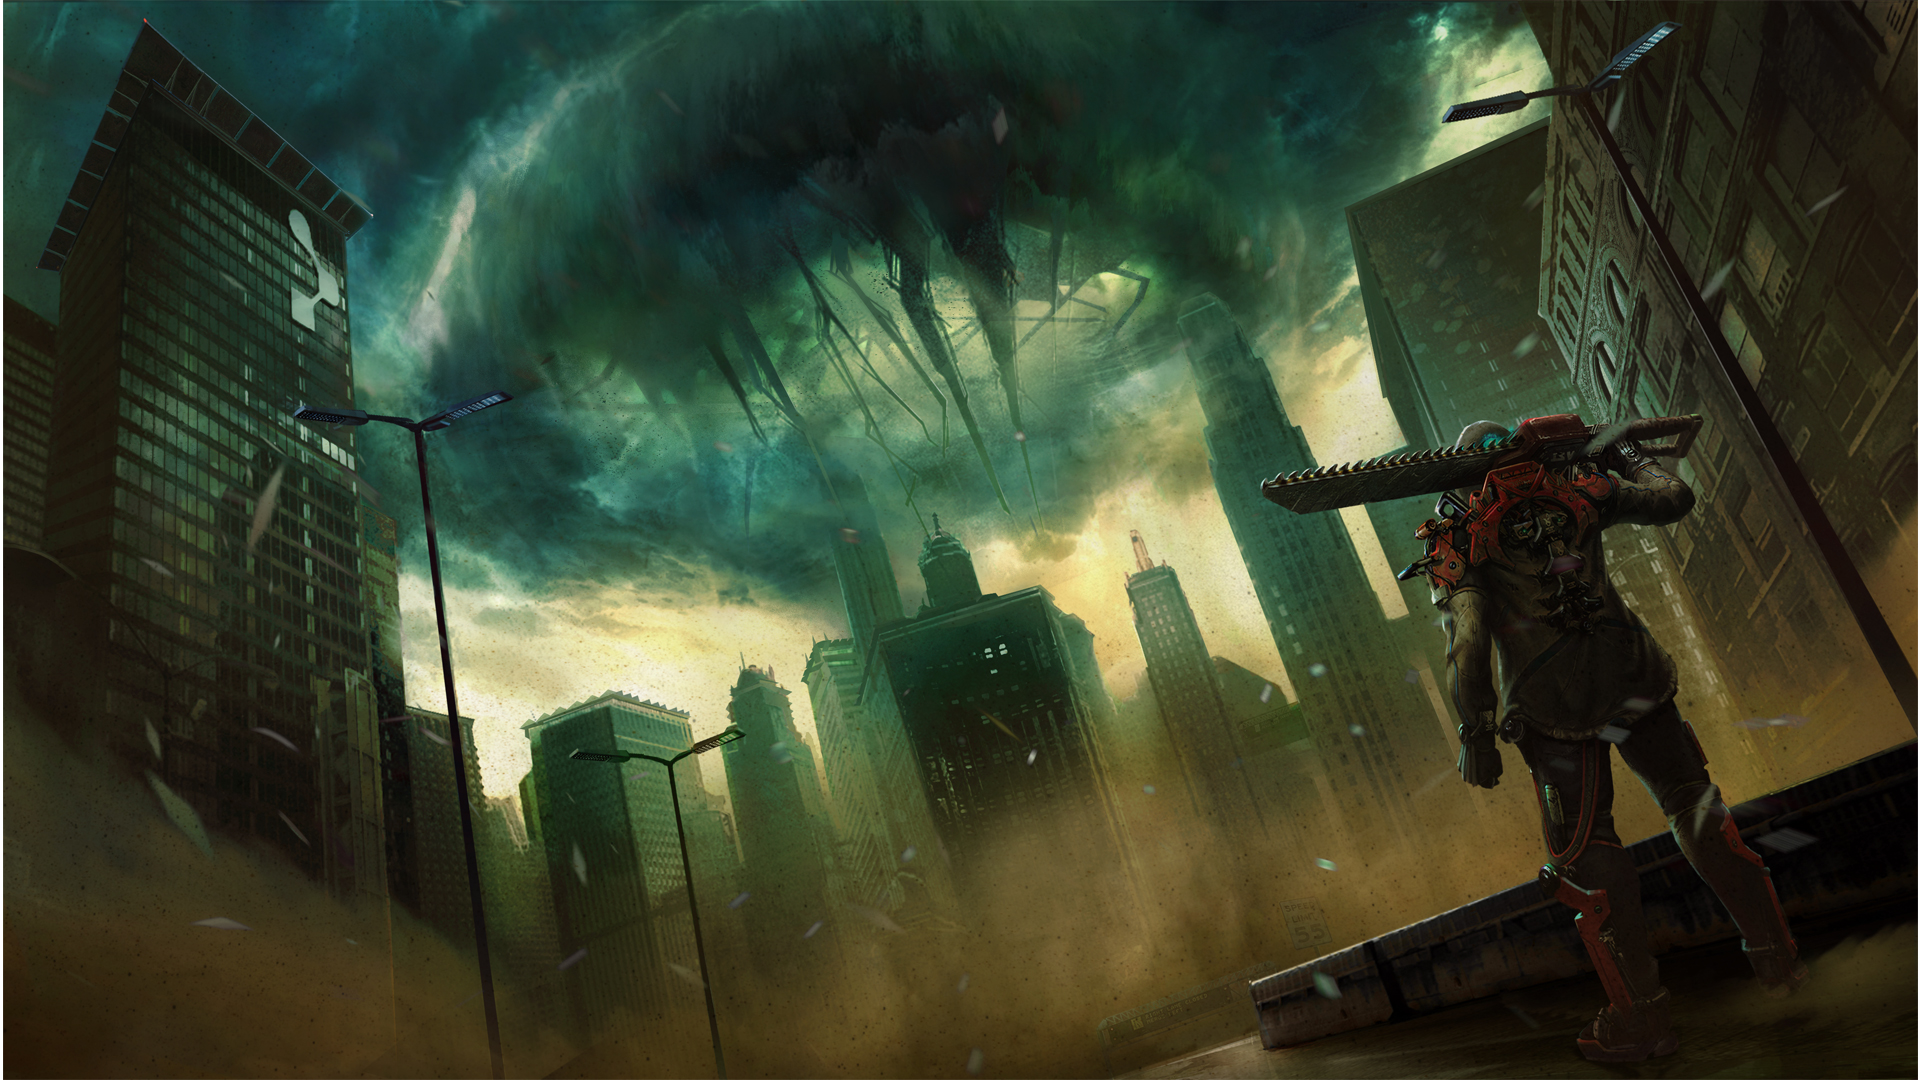 The Surge 2: Hands-on with the Soulsborne trying to carve out its own legacy